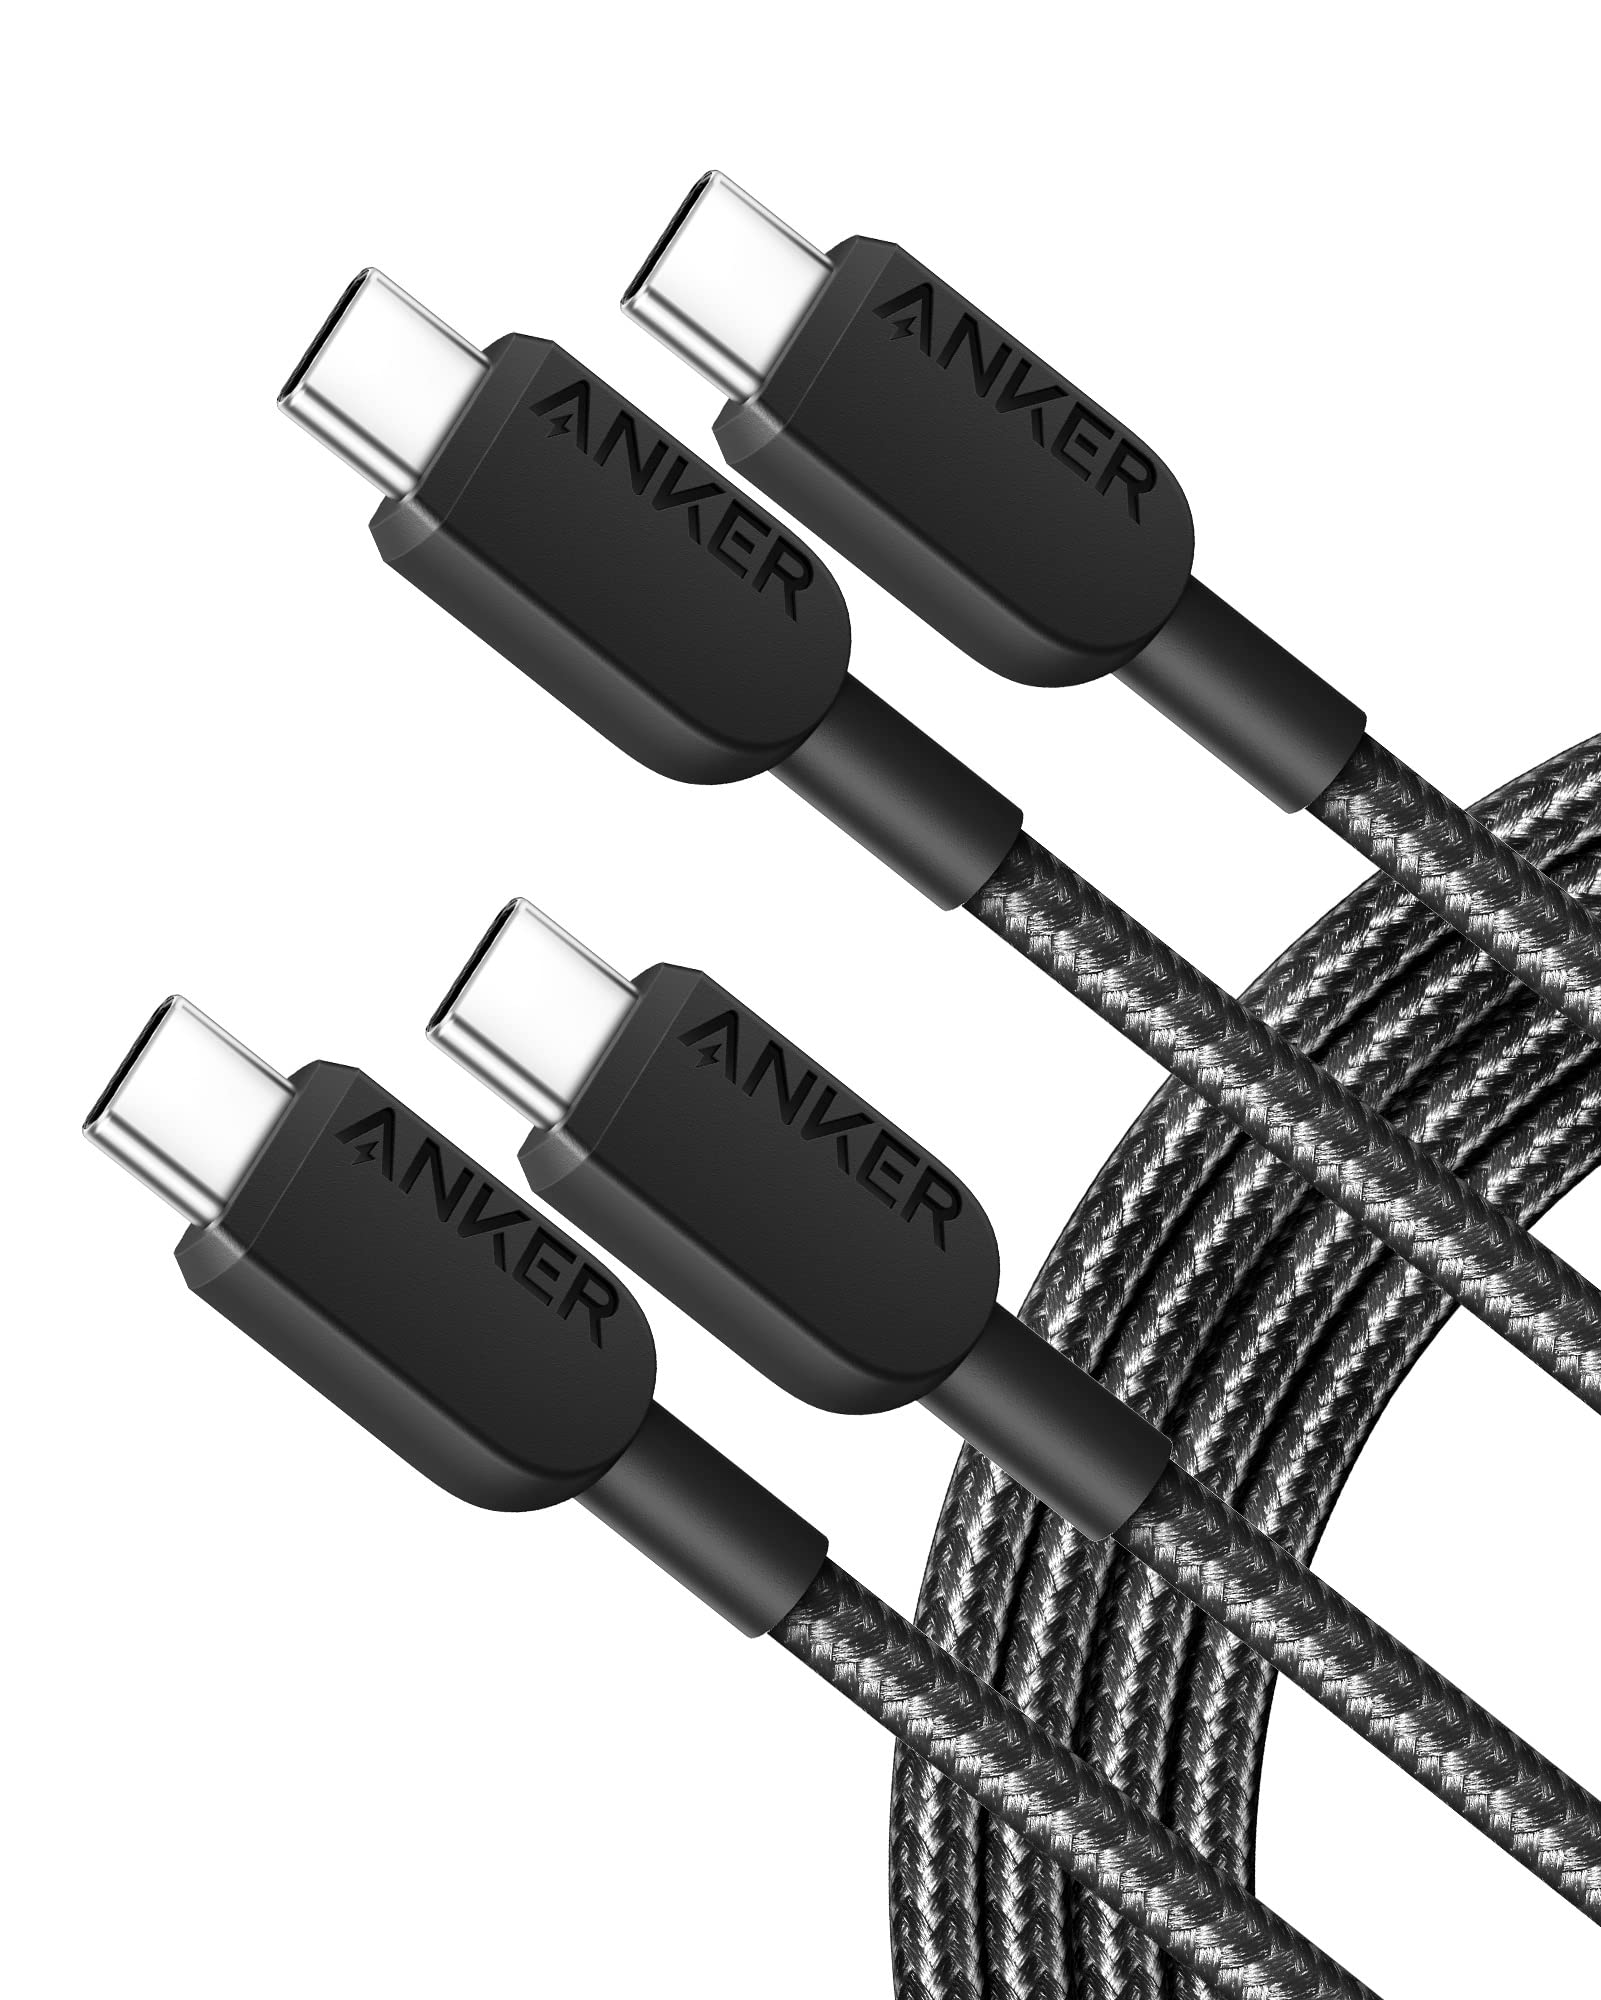 2-Pack 6' Anker 310 USB C to USB C 60W / 3A Charging Cable $9